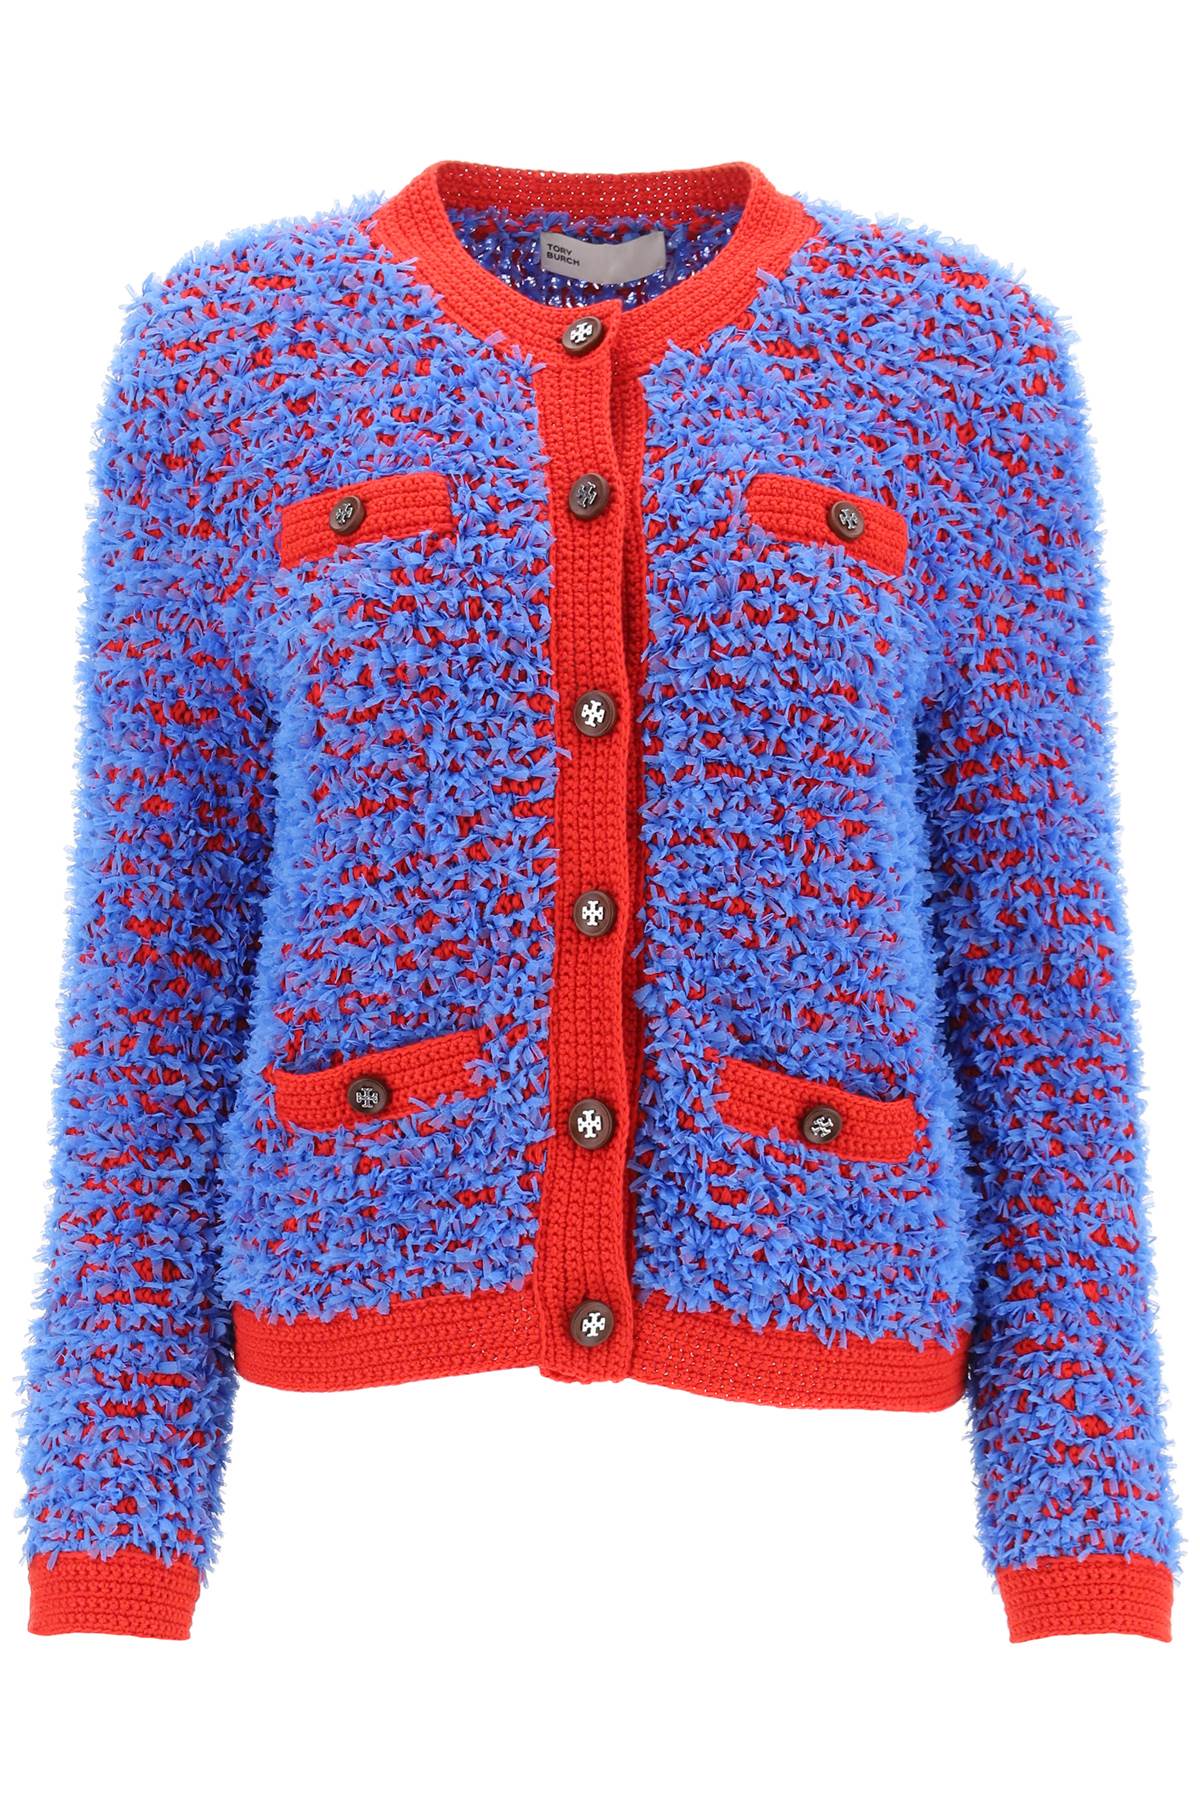 TORY BURCH Confetti Tweed Jacket for Women - Classic Styling and Functional Pockets